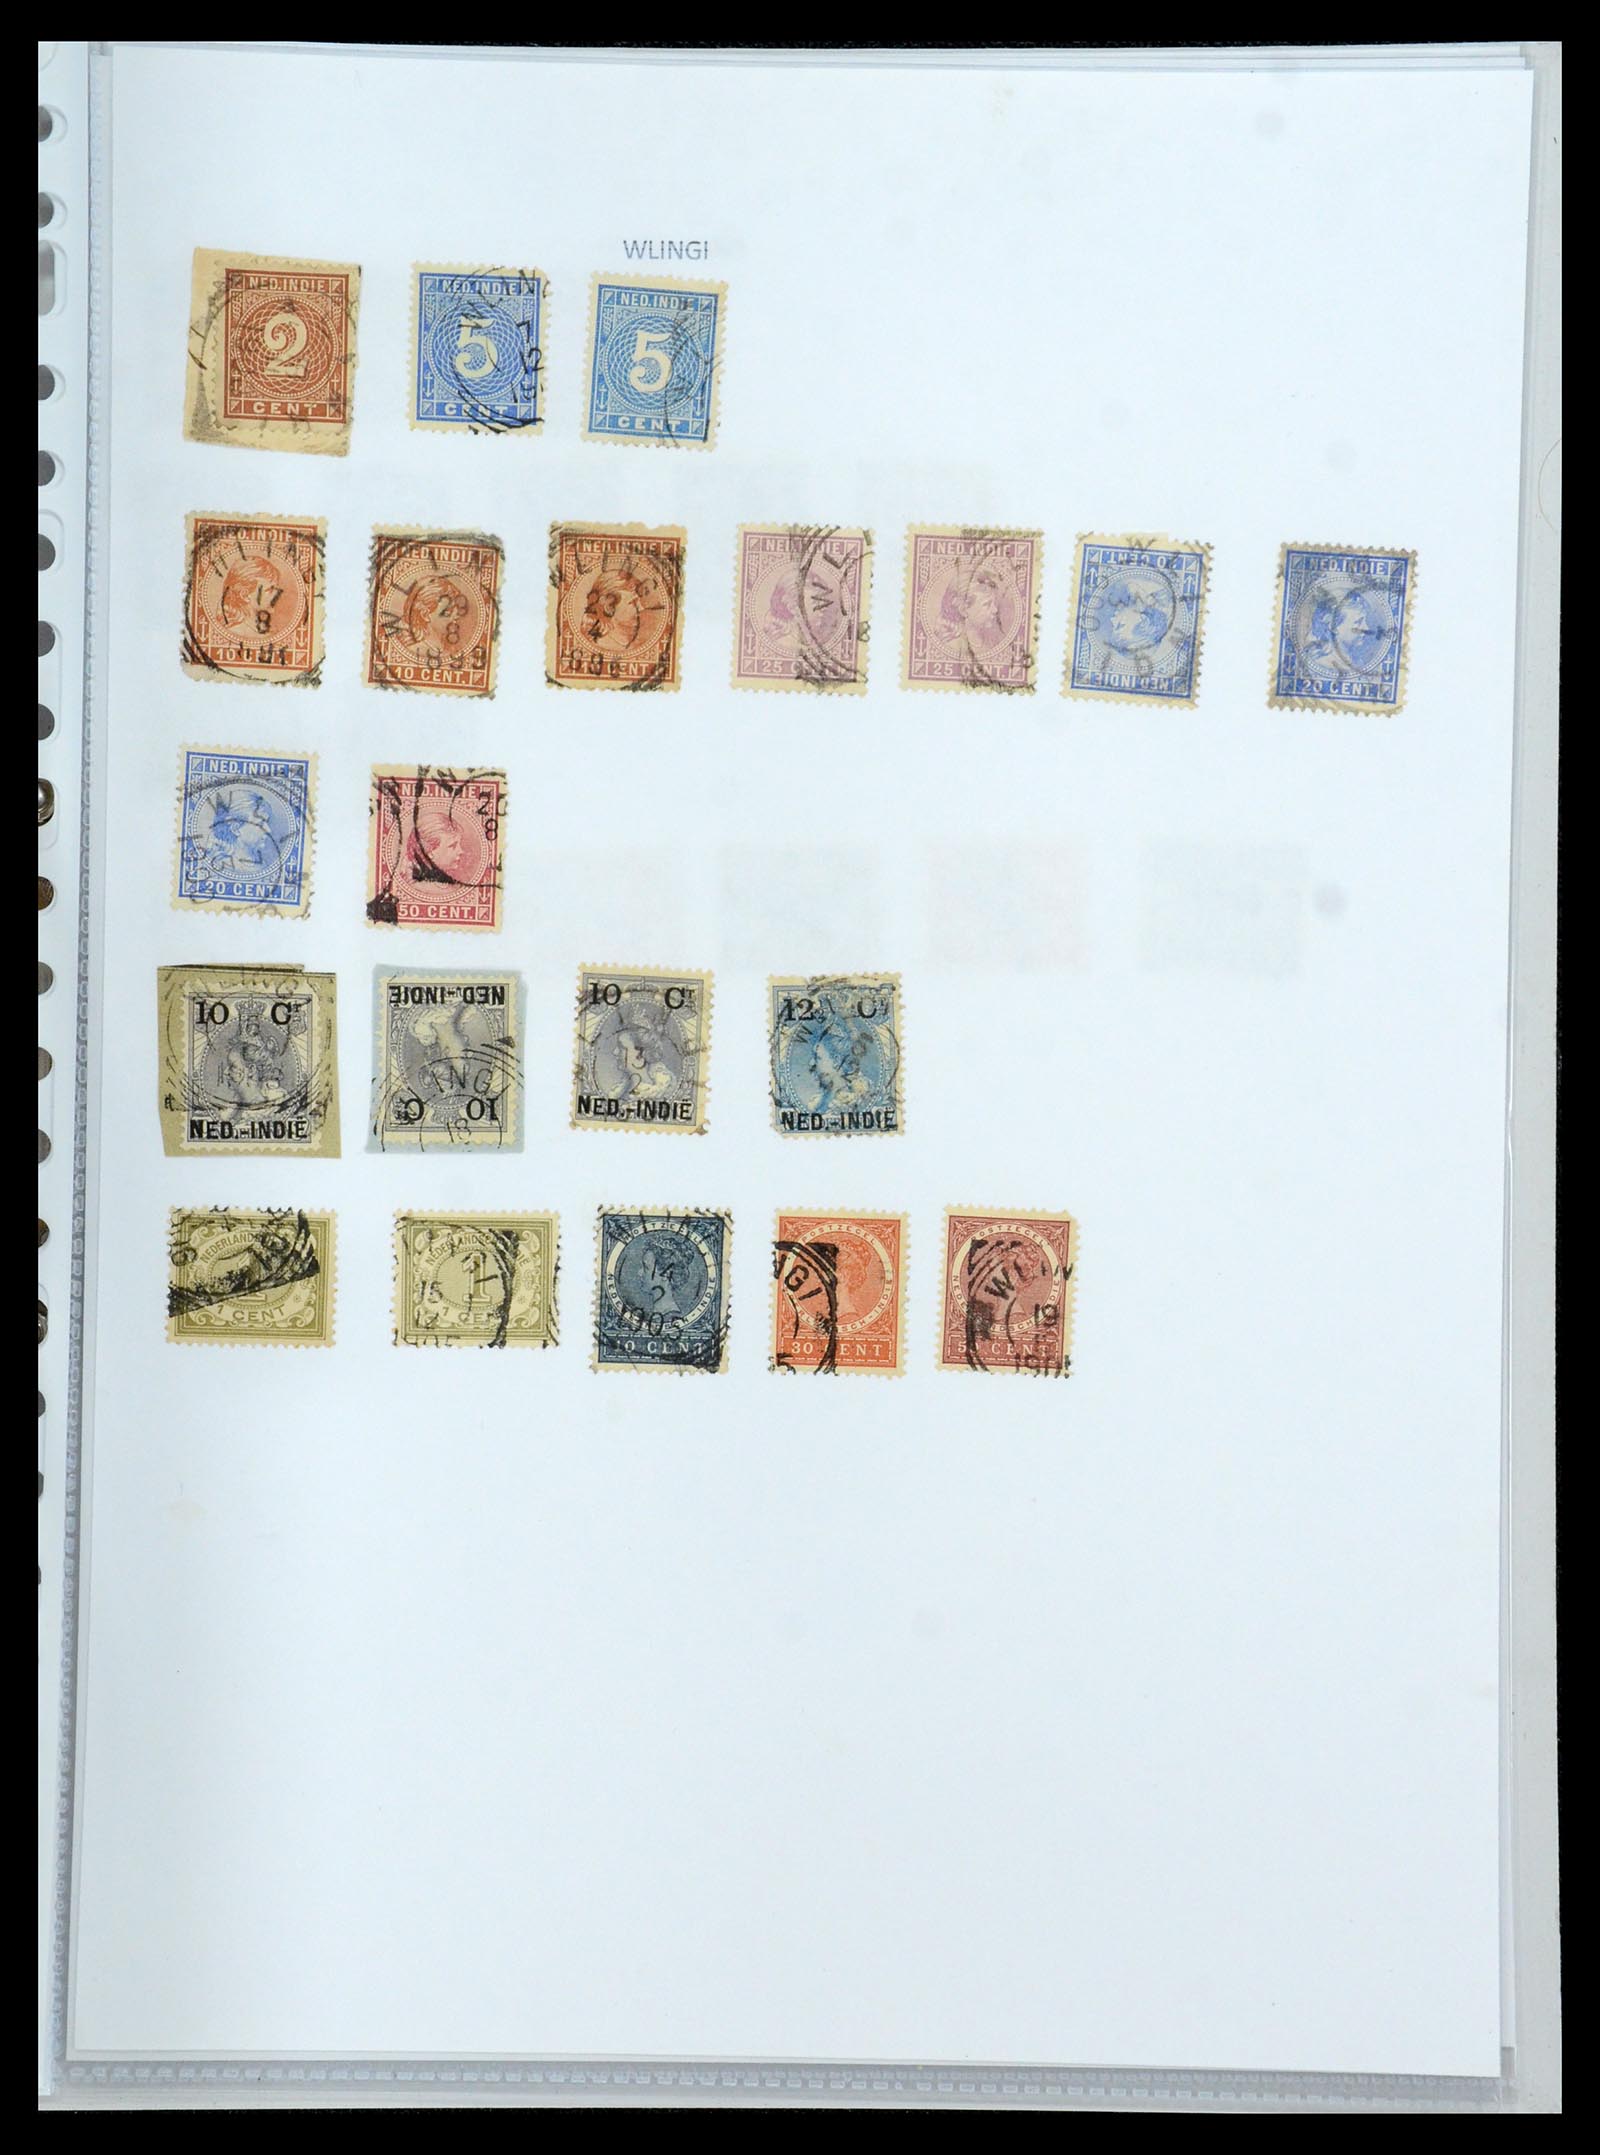 36432 222 - Stamp collection 36432 Dutch east Indies square cancels.